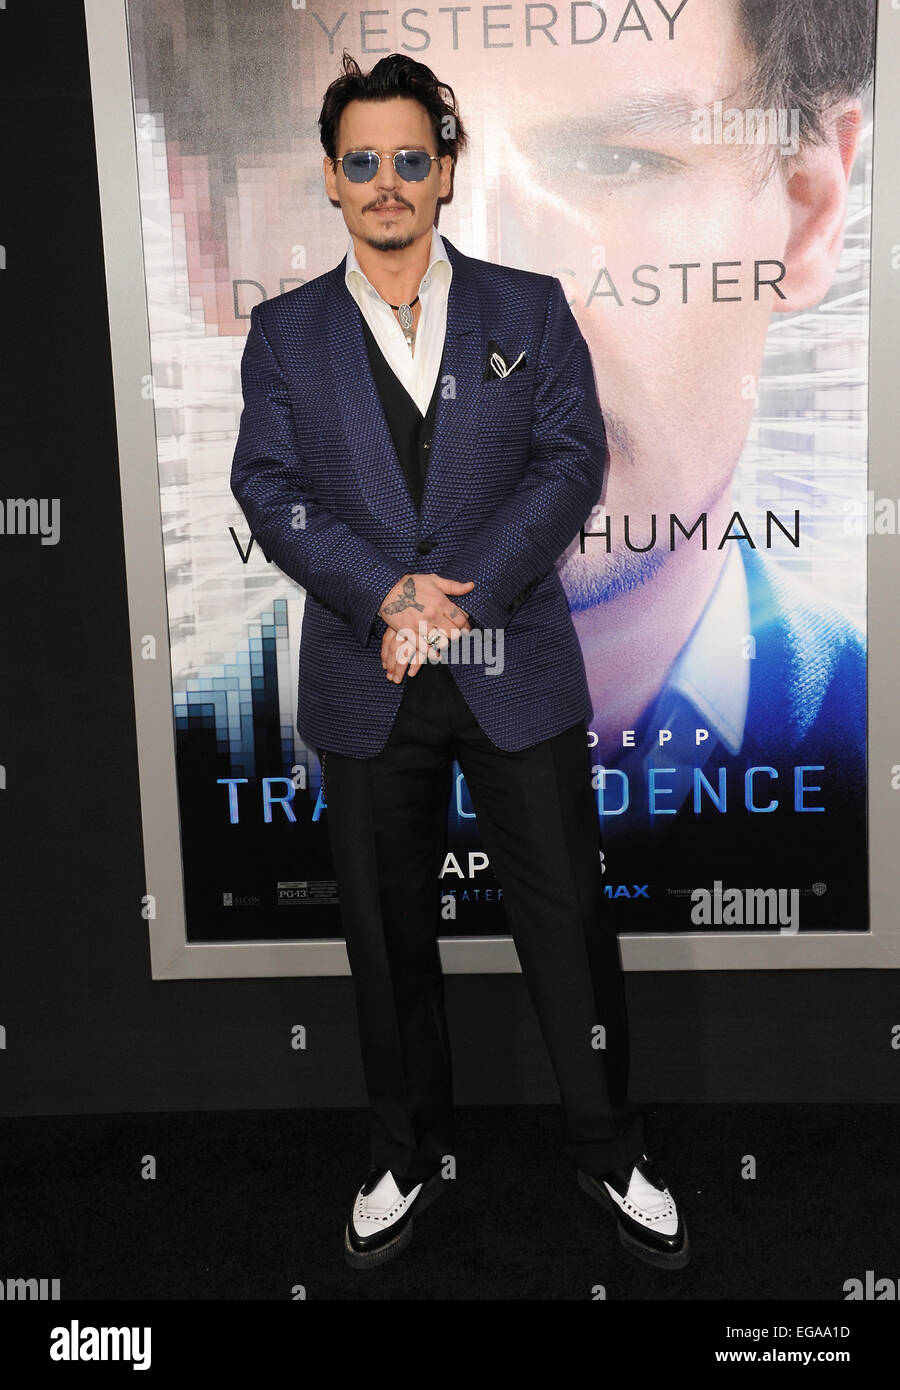 LOS ANGELES, CA - APRIL 10, 2014: Johnny Depp at the Los Angeles premiere of his movie 'Transcendence' at the Regency Village Theatre, Westwood. Stock Photo